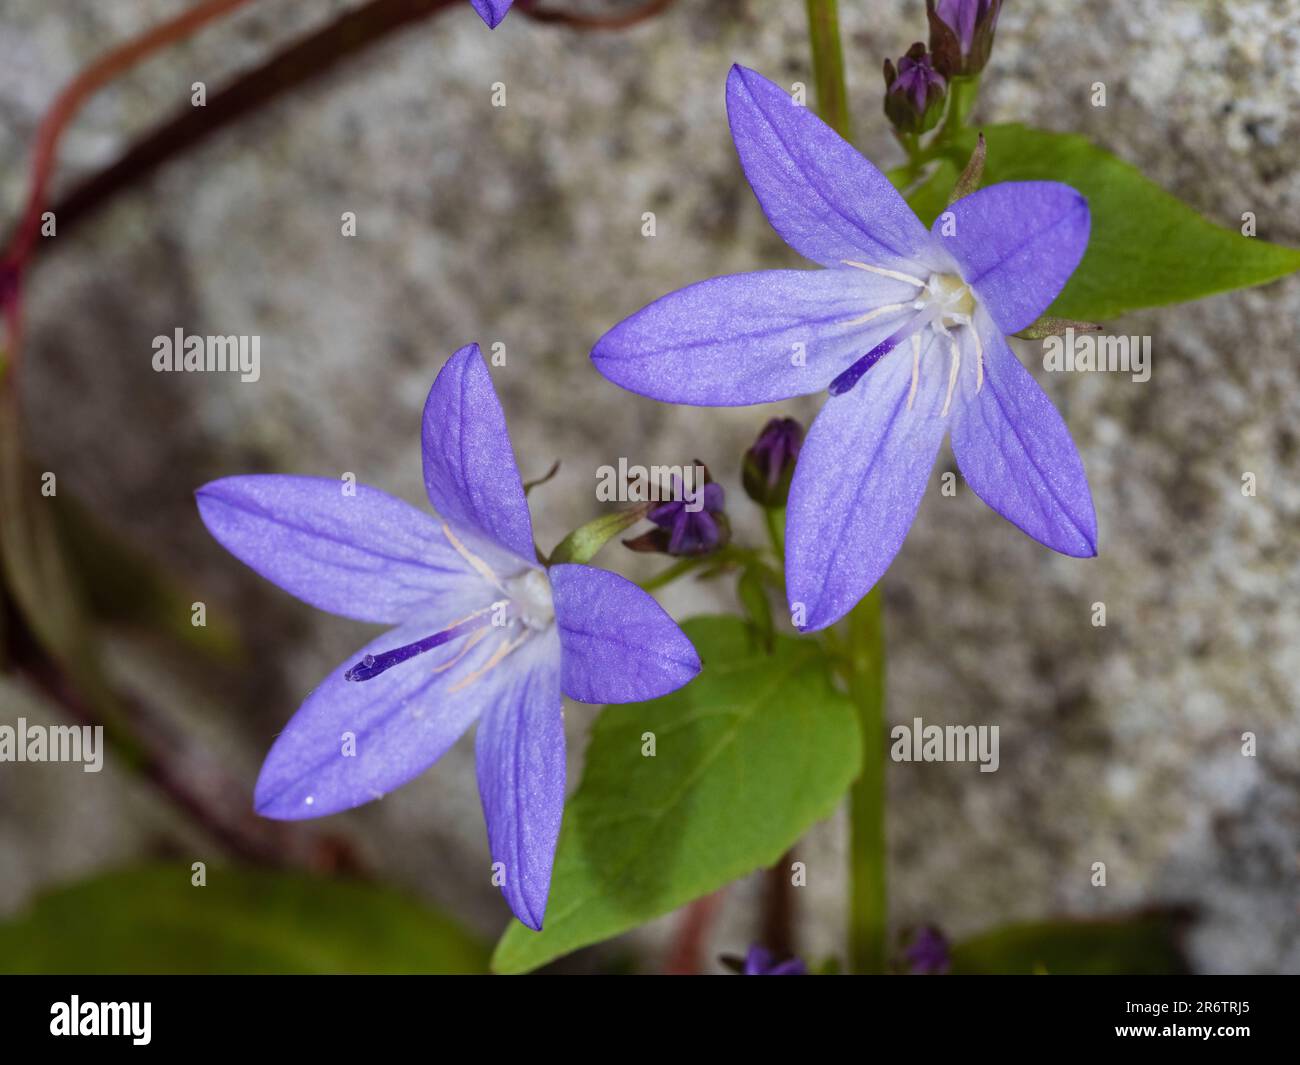 Star like blue flowers of the trailing bellflower, Campanula poscharskyana, growing against a wall Stock Photo